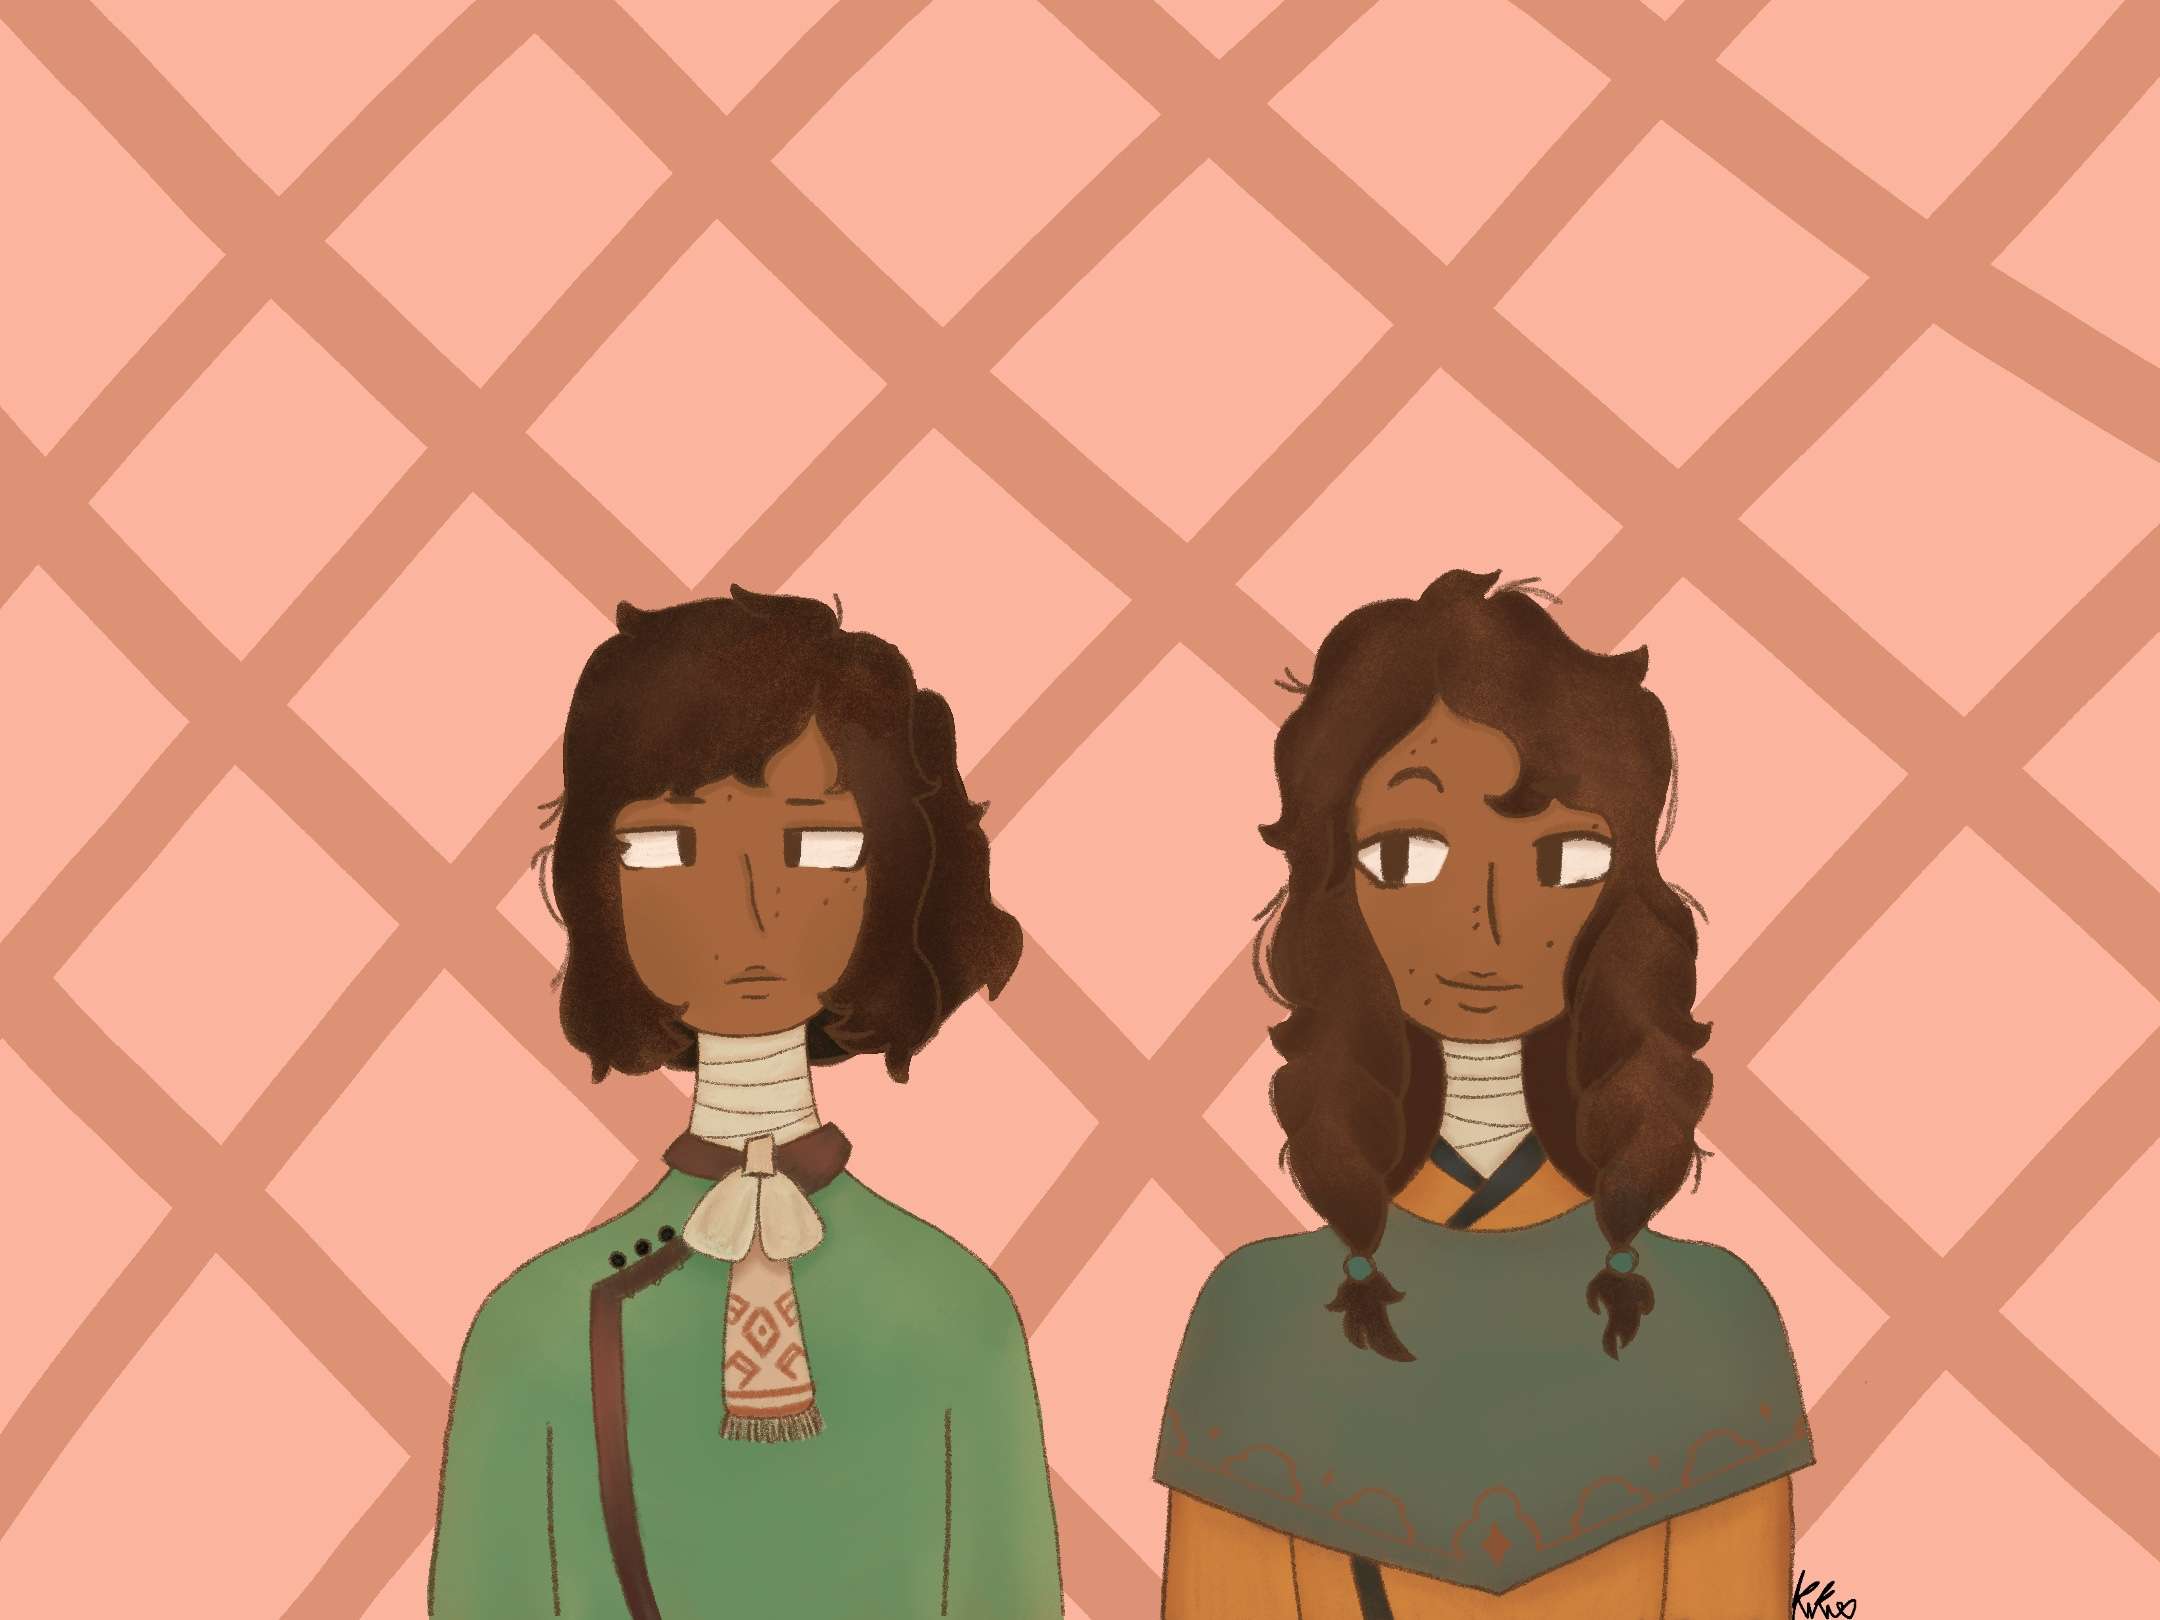 Over a pink check stripe background stand twins Pava and Isolia. Pava looks to the viewer neutrally while Isolia looks to him with a small smile